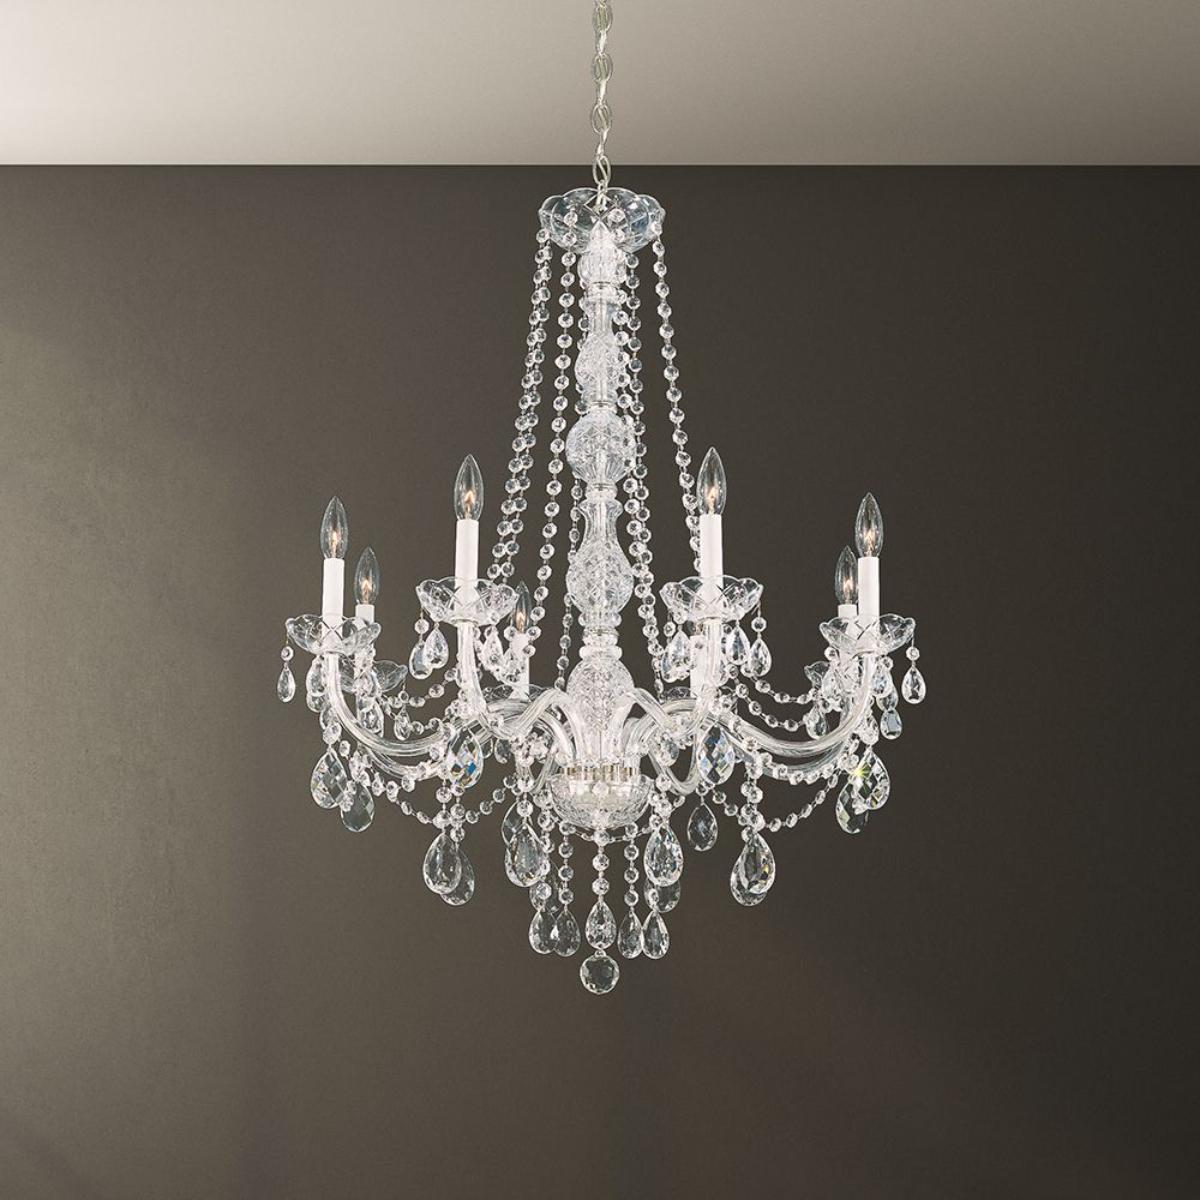 Arlington 8 Lights Polished Silver Chandelier with Clear Heritage Crystals